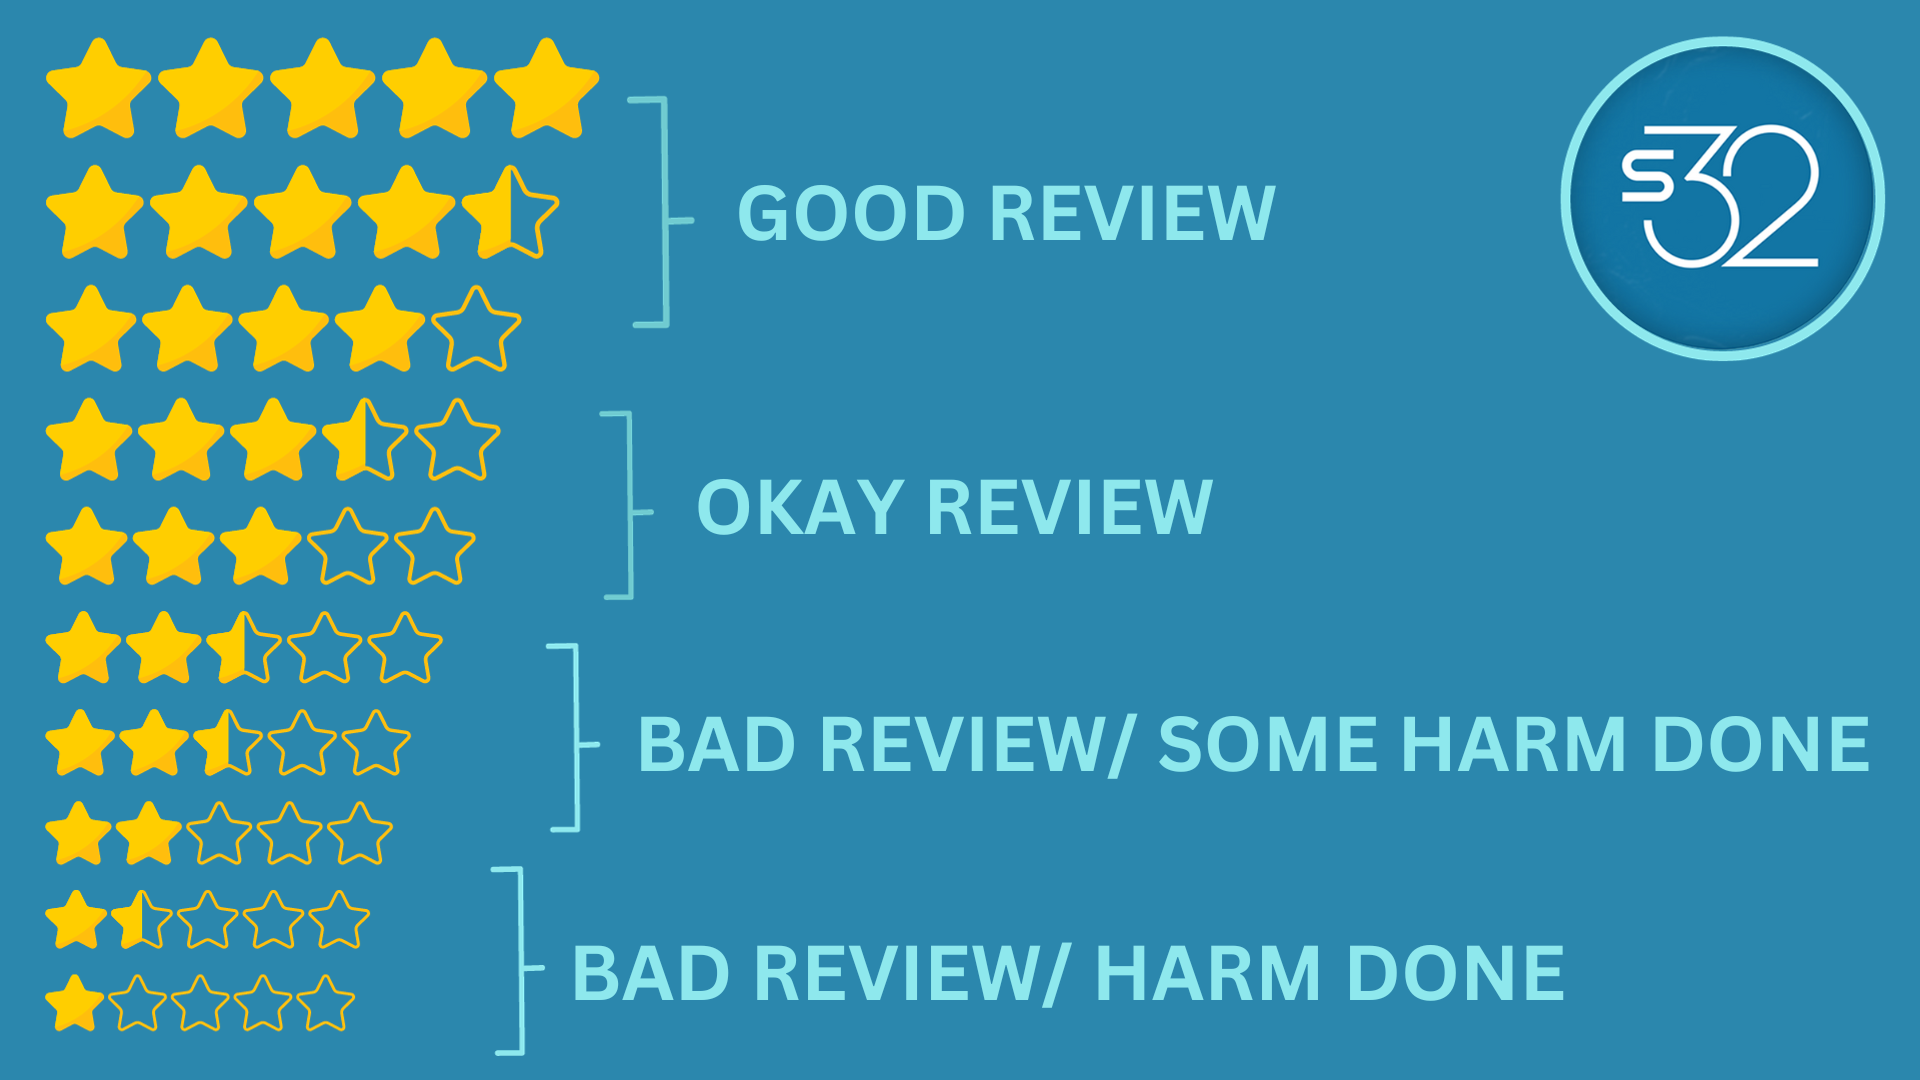 Star Rating for Google reviews